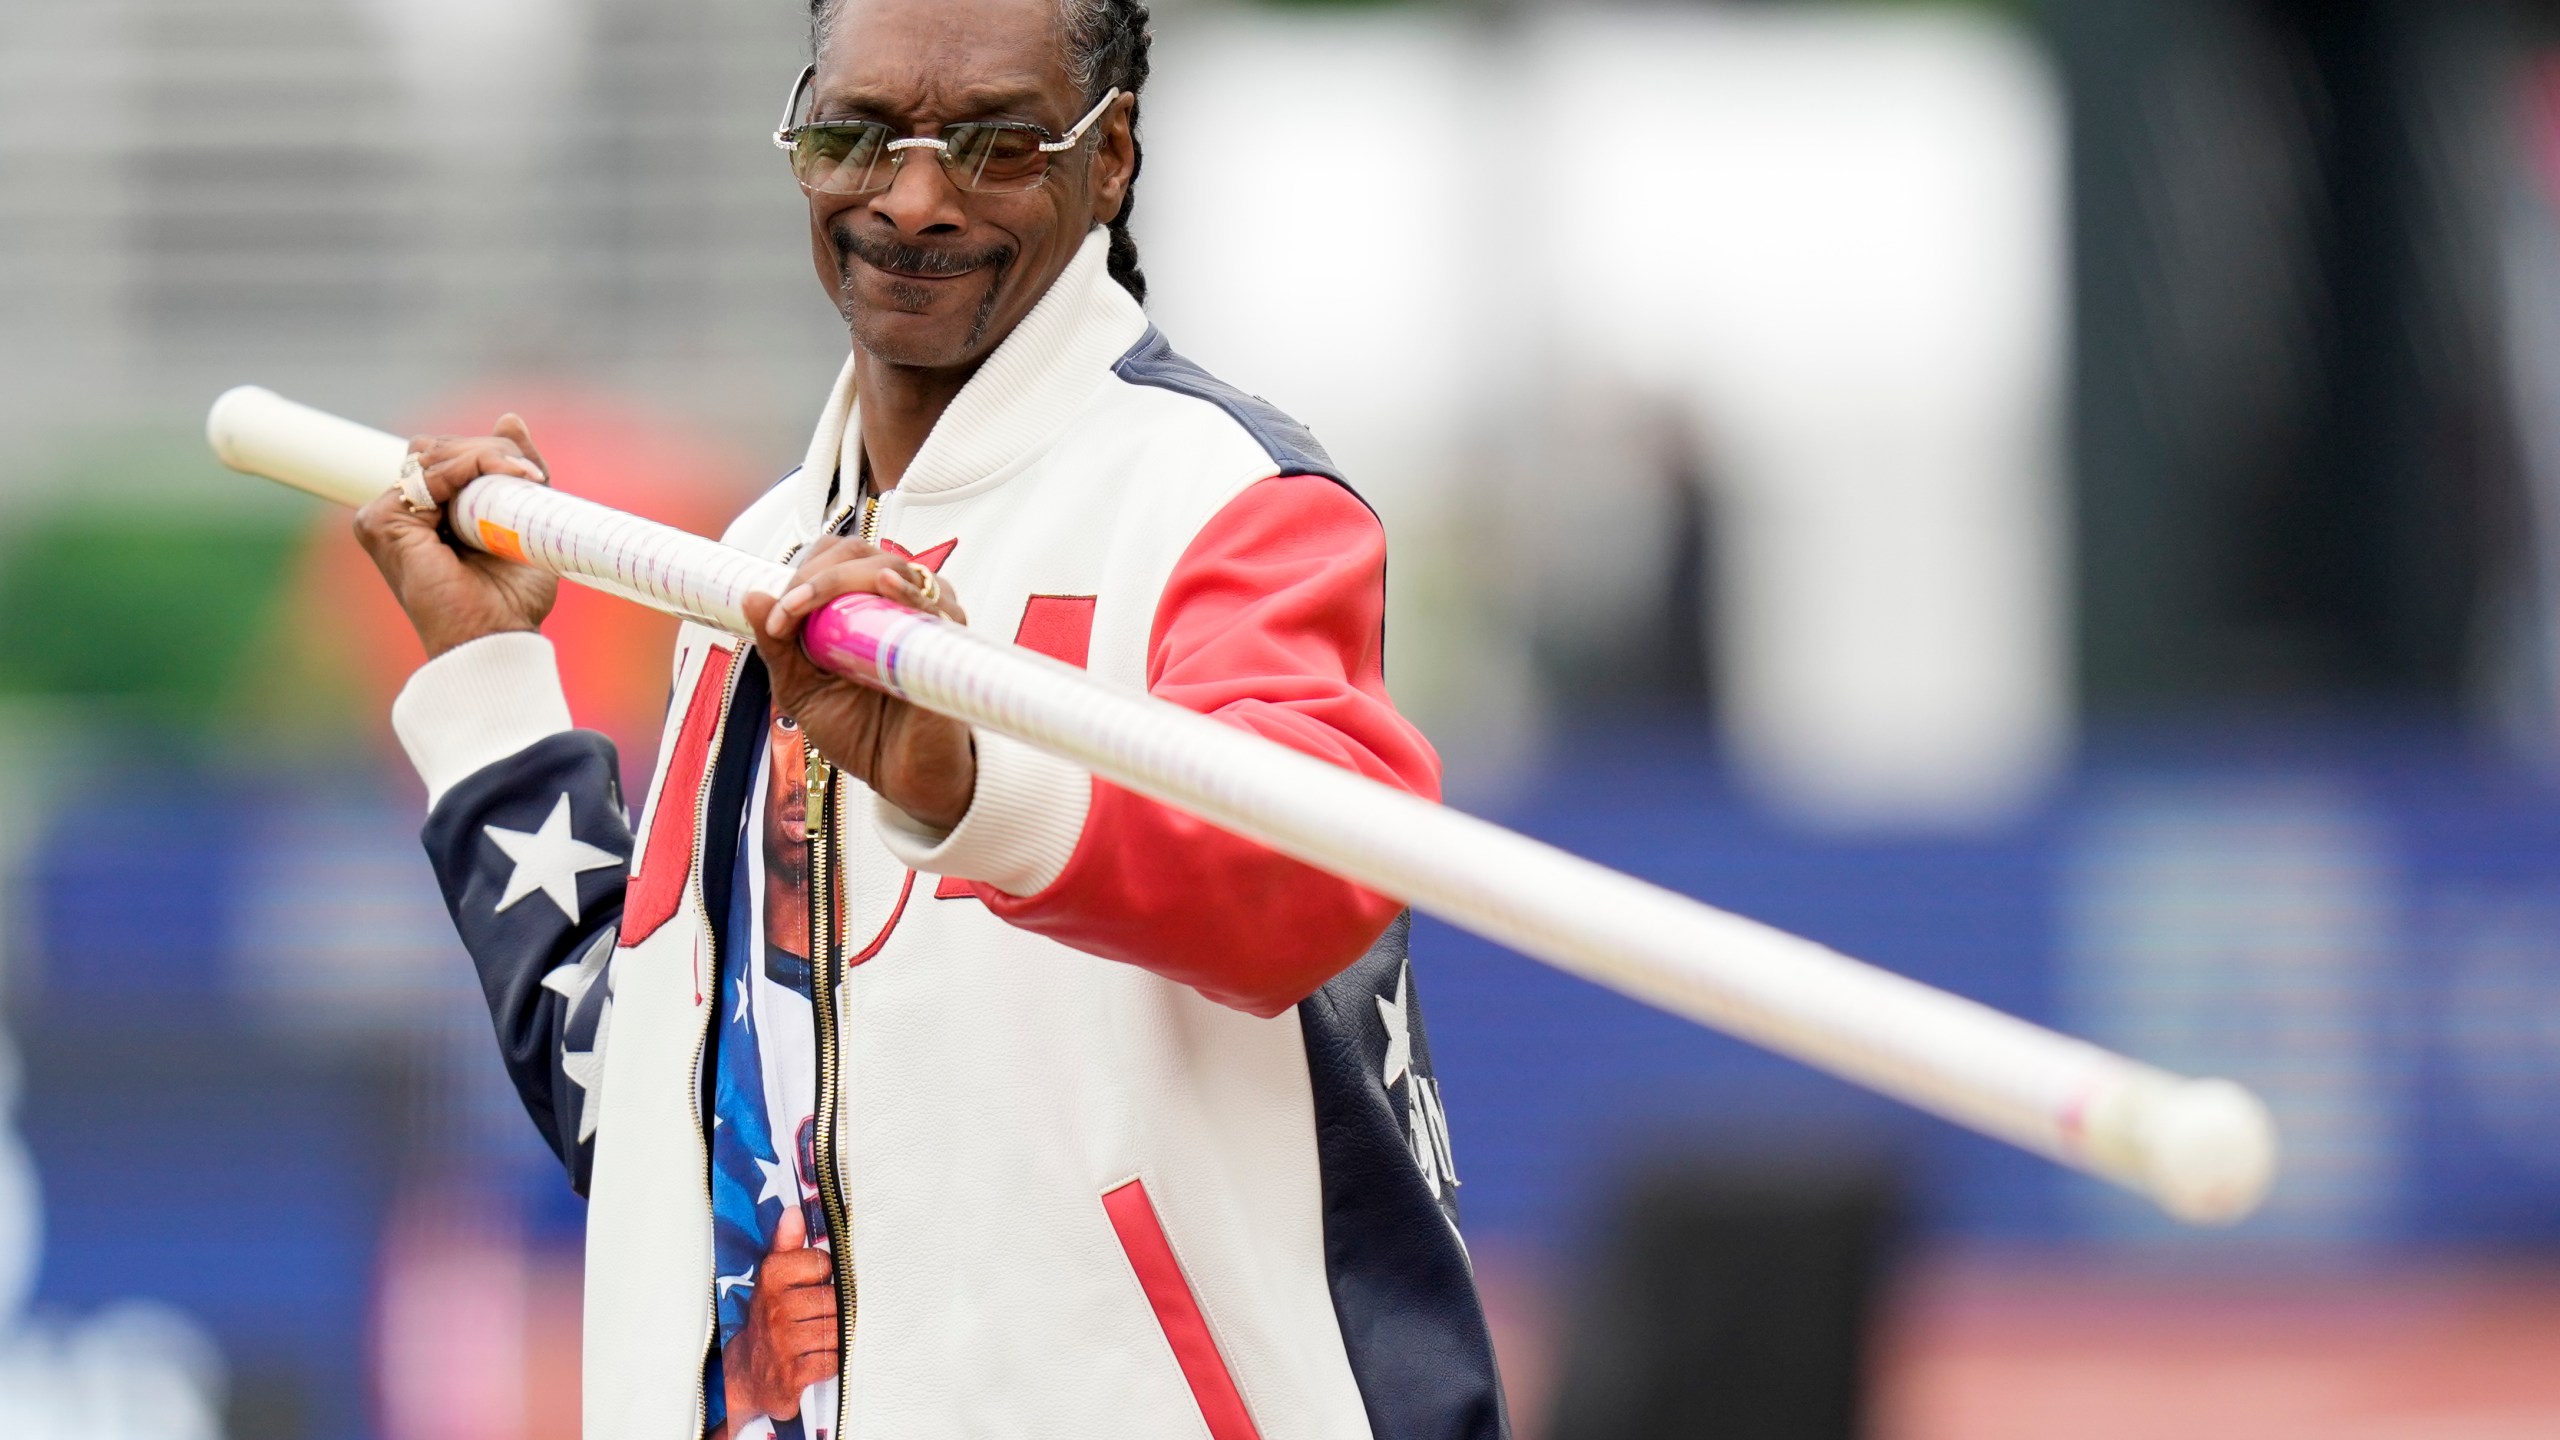 Play entertainer, Snoop Dogg gets a pole vault lesson during the U.S. Track and Field Olympic Team Trials Sunday, June 23, 2024, in Eugene, Ore. (AP Photo/Charlie Neibergall)